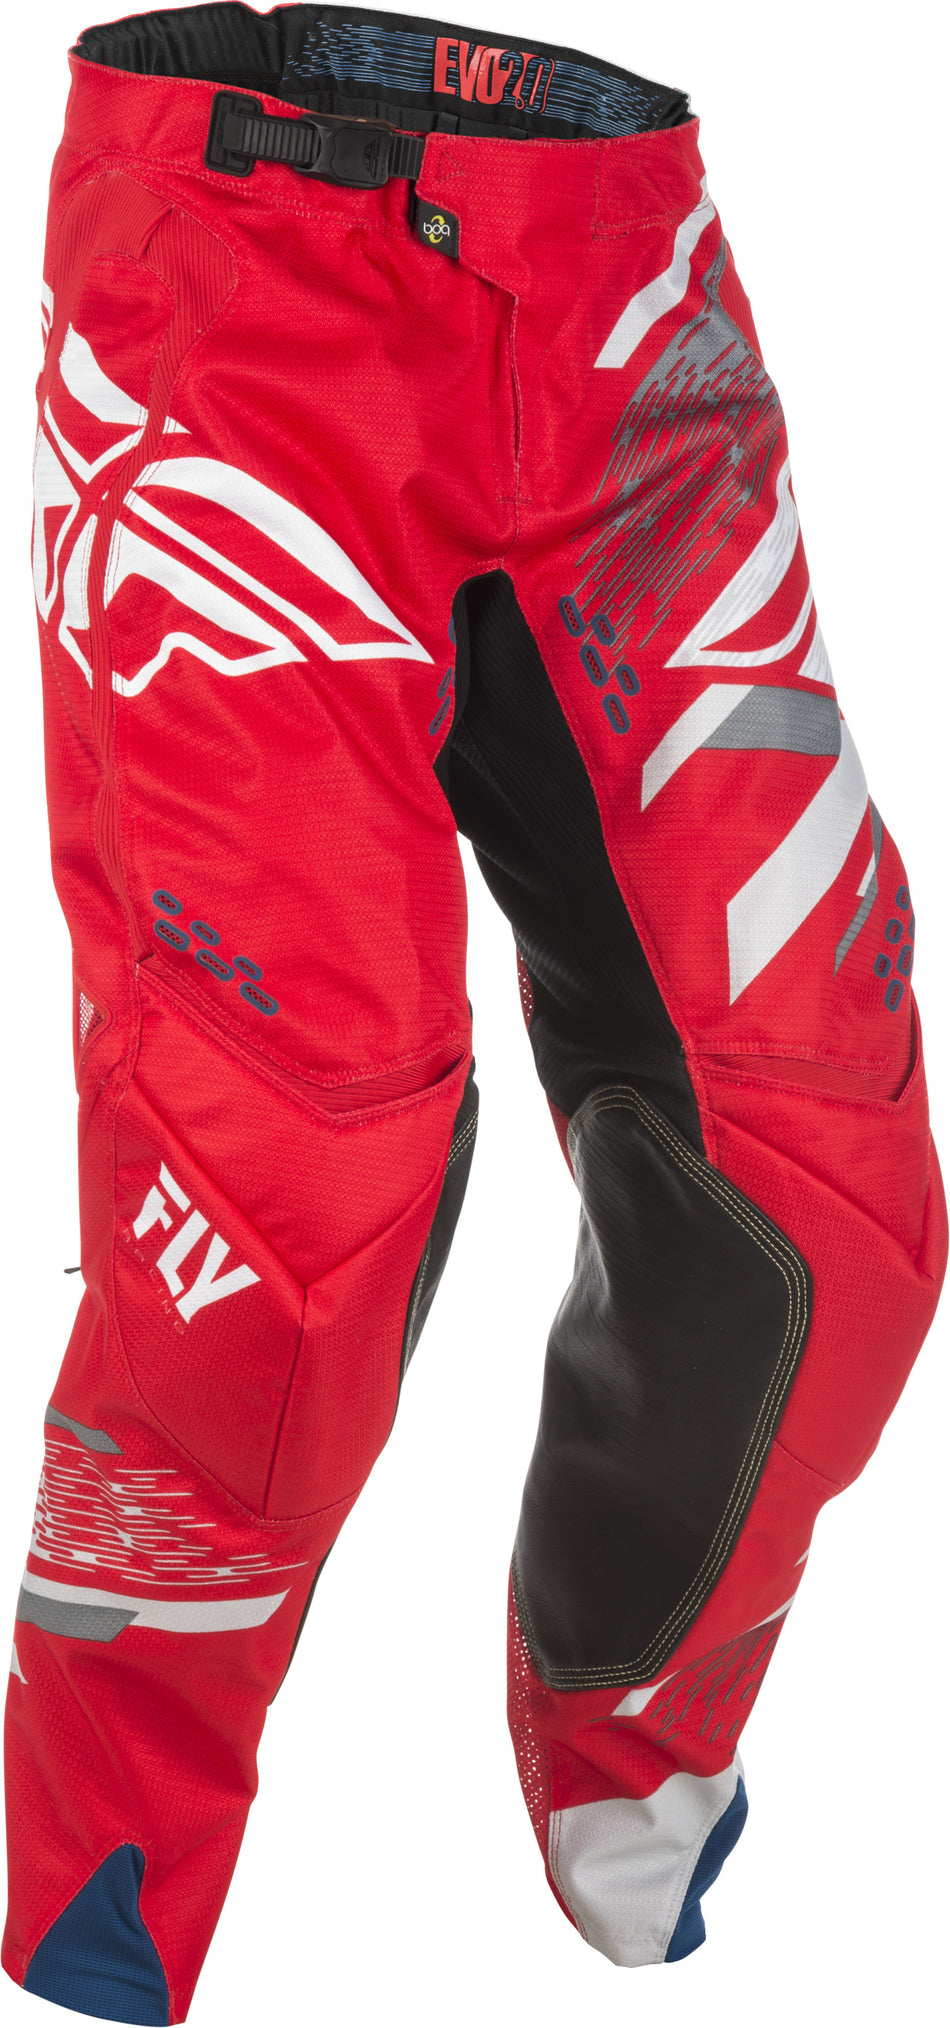 FLY RACING Evolution 2.0 Pants Red/Grey/White Sz 40 371-23240